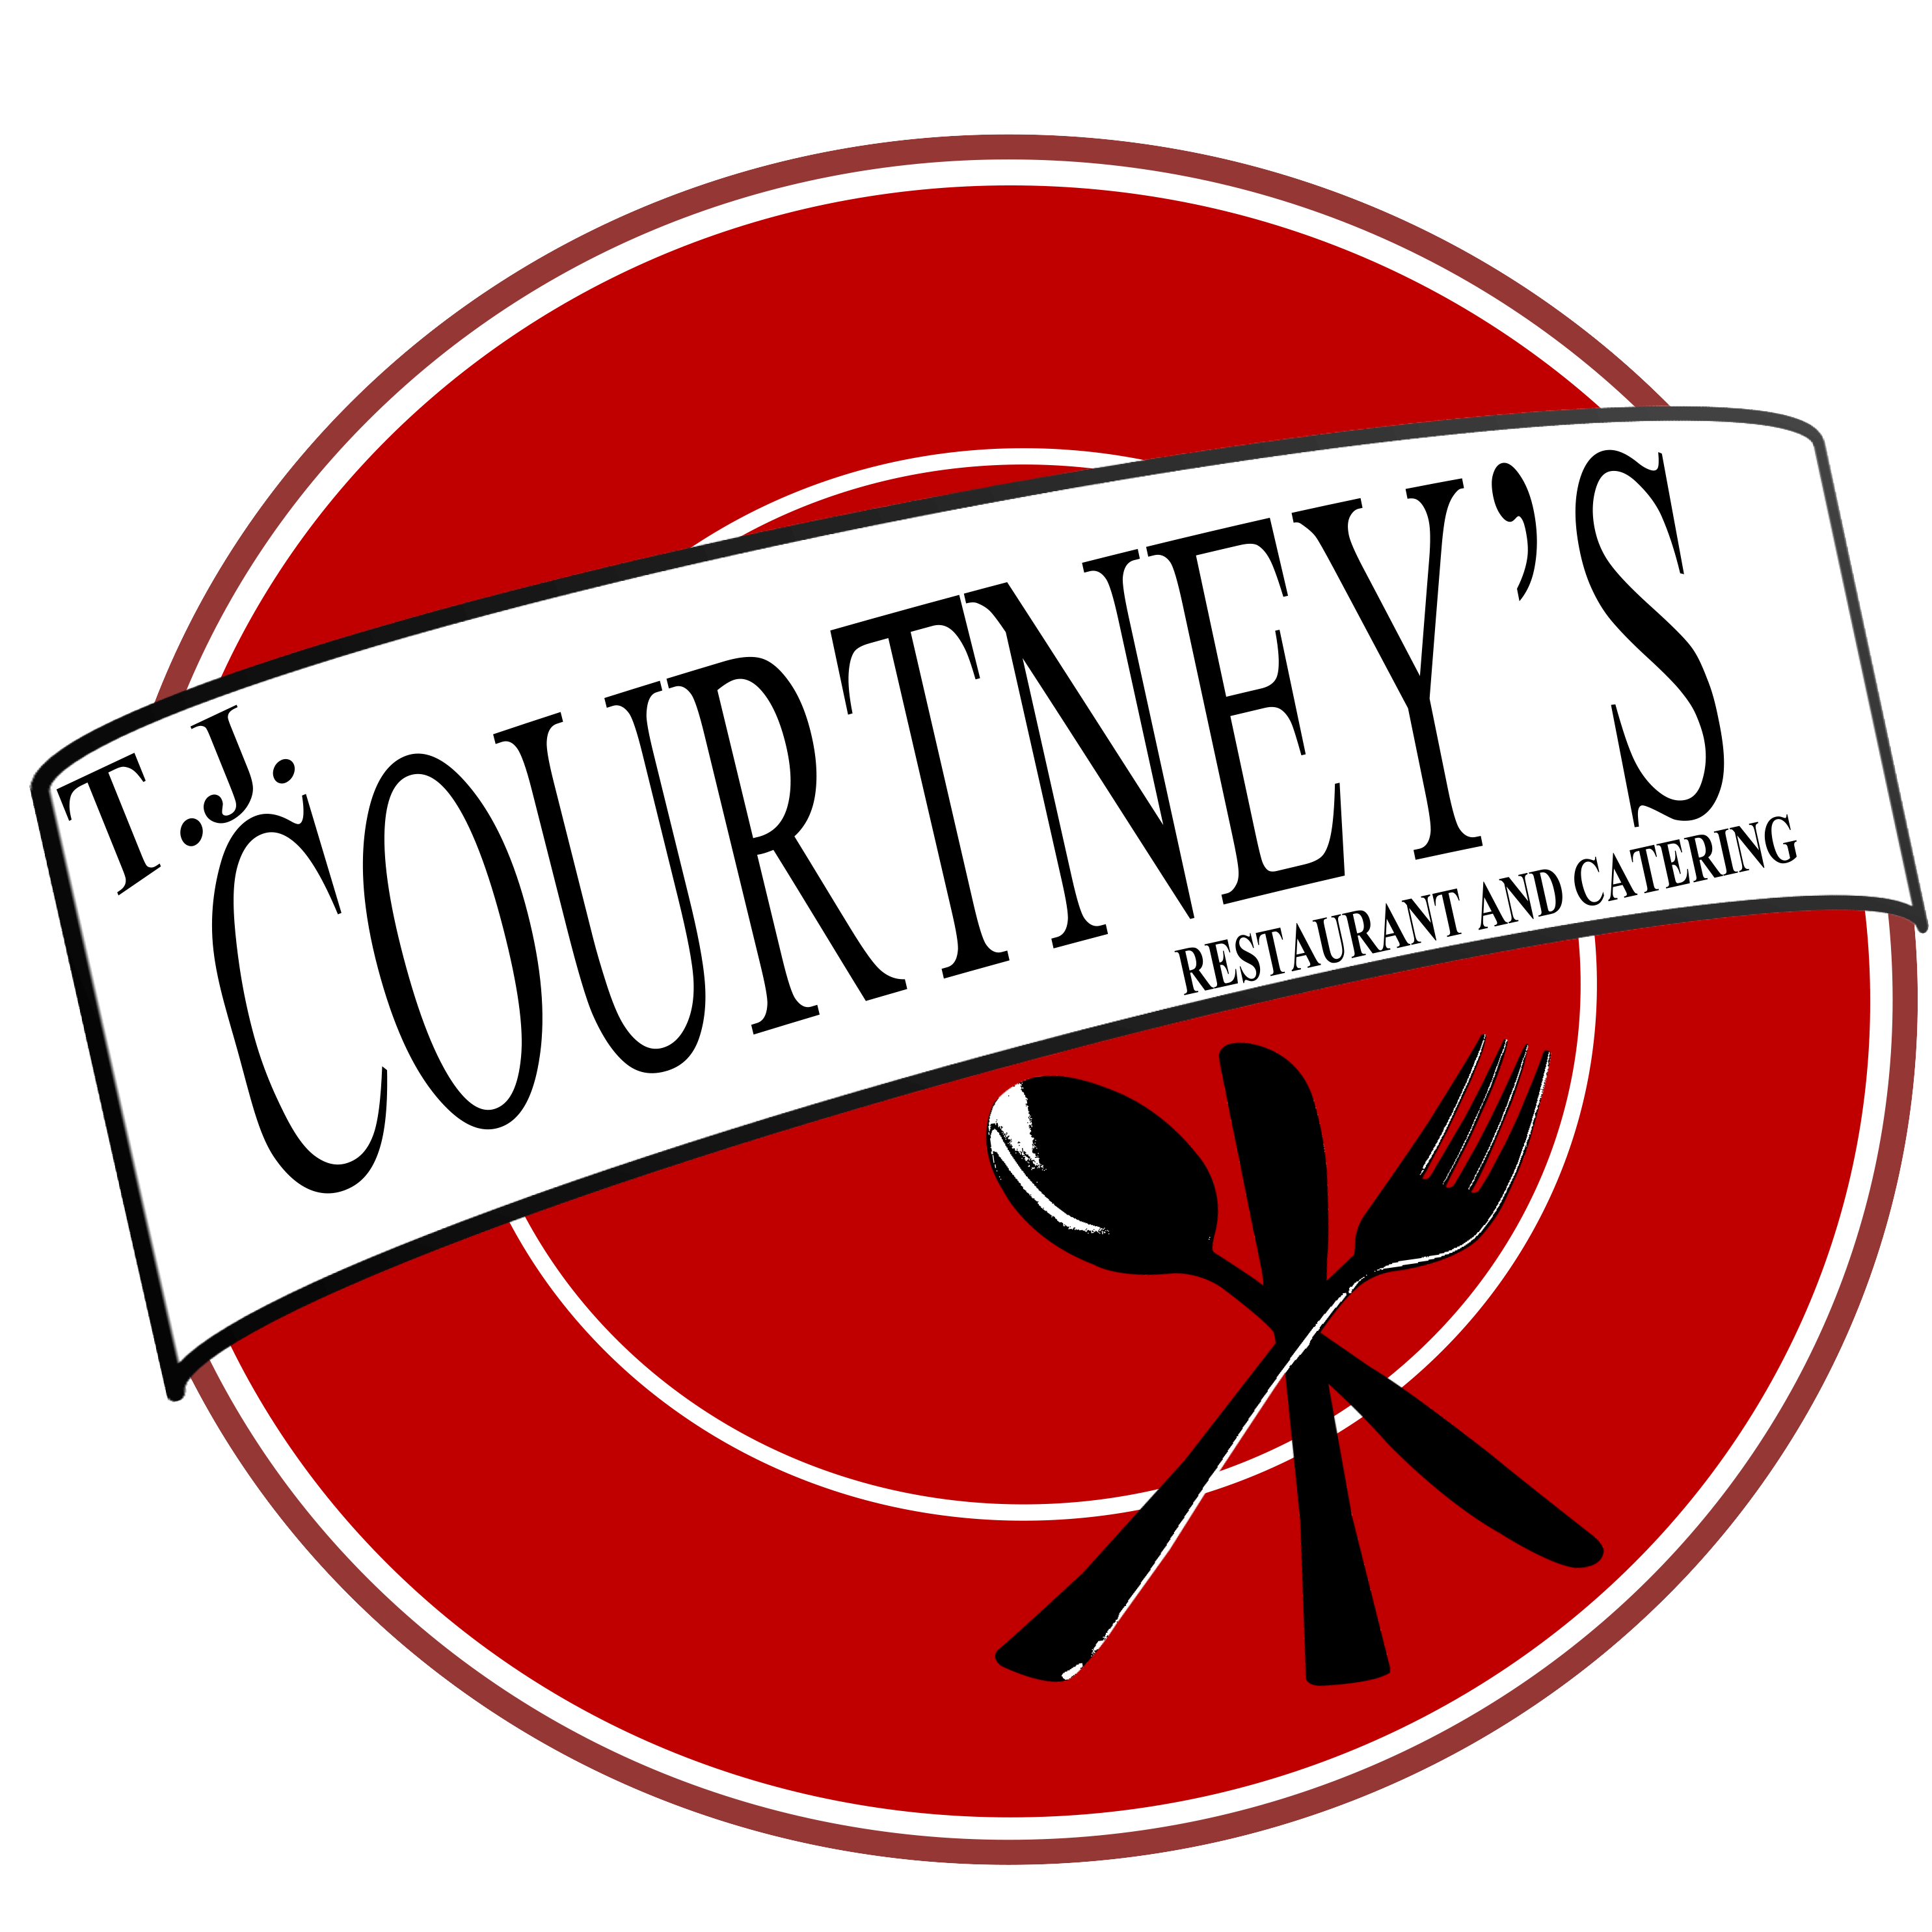 T.J. Courtney's Restaurant and Catering Photo